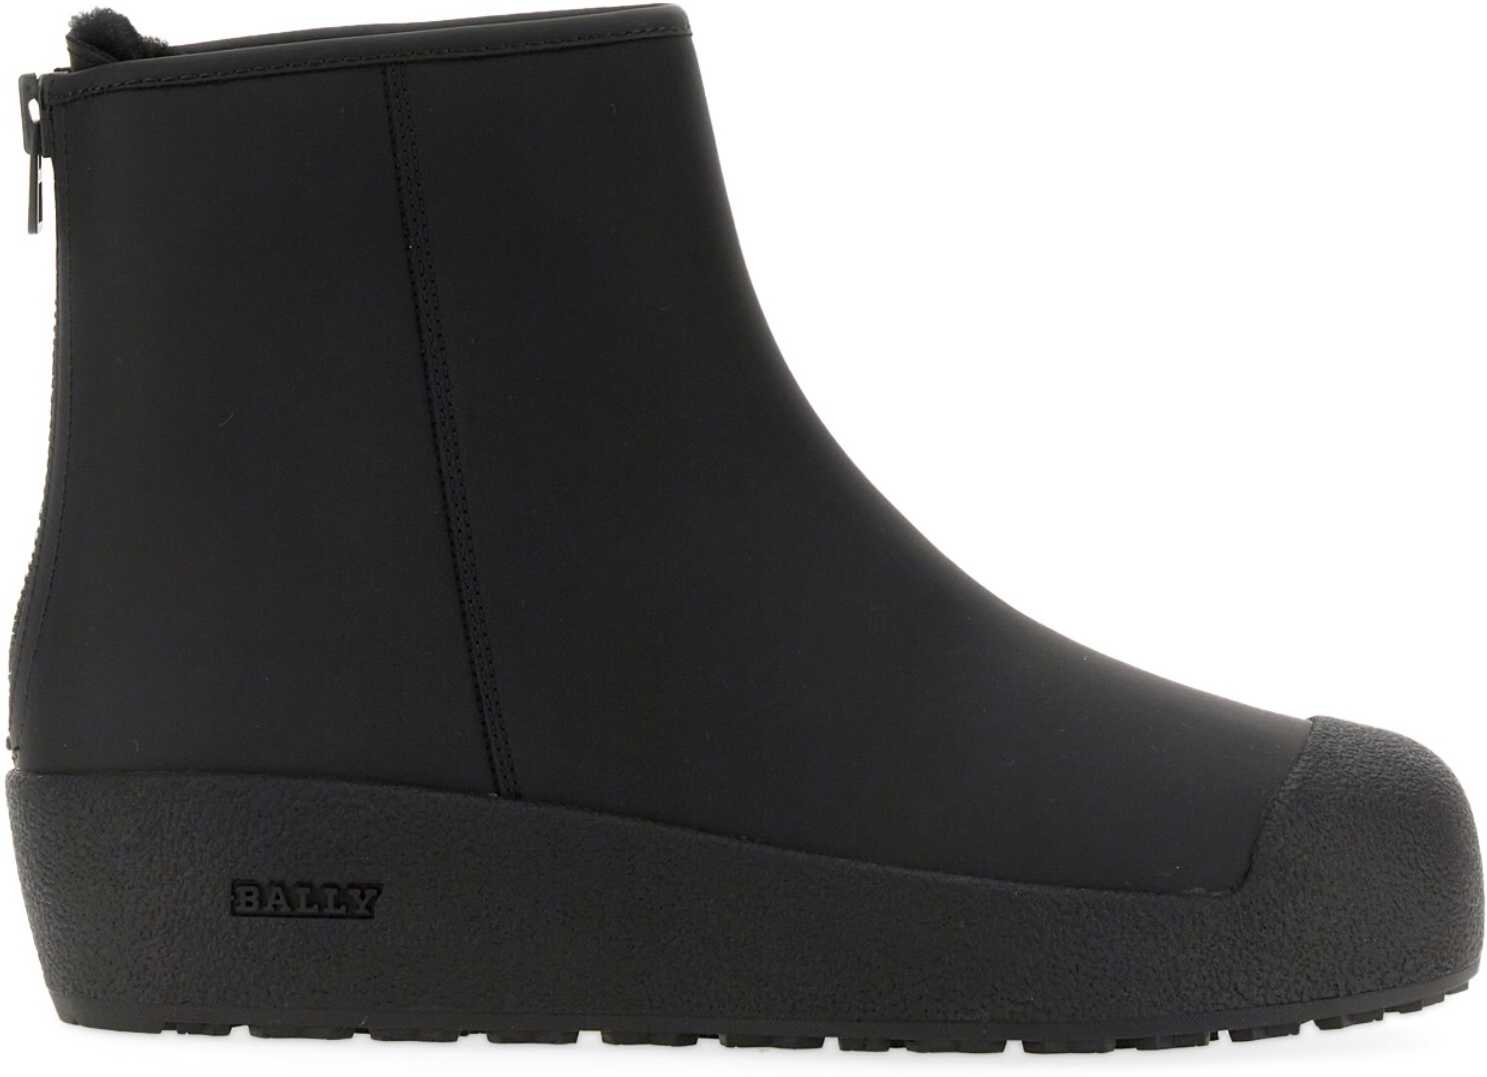 BALLY CURLING Curling Boot BLACK